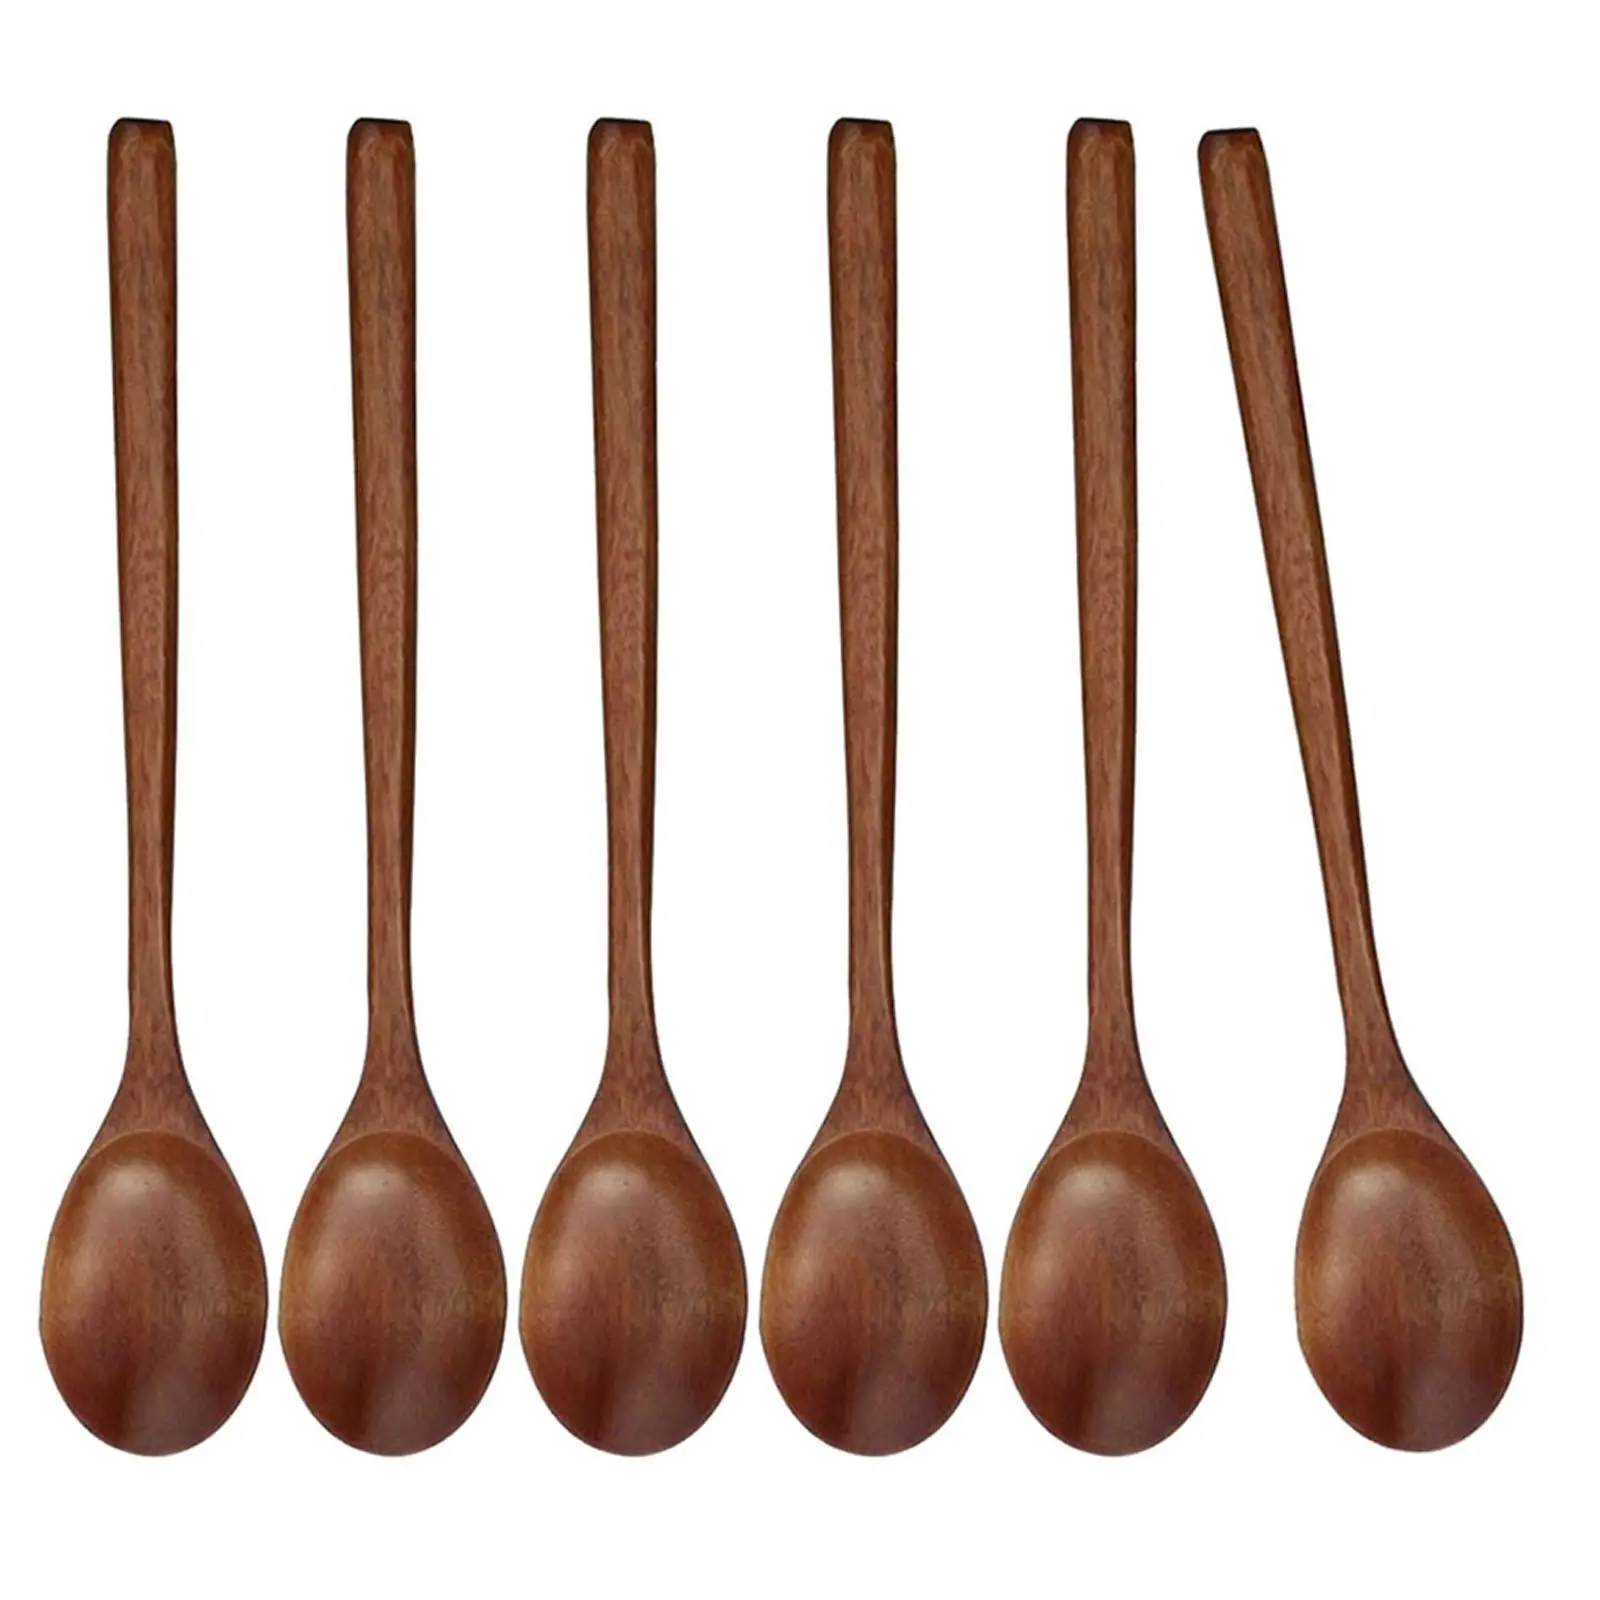 

6Pcs Small Wooden Spoon Salt Sugar Spices Seasoning Cooking Stirring Spoons